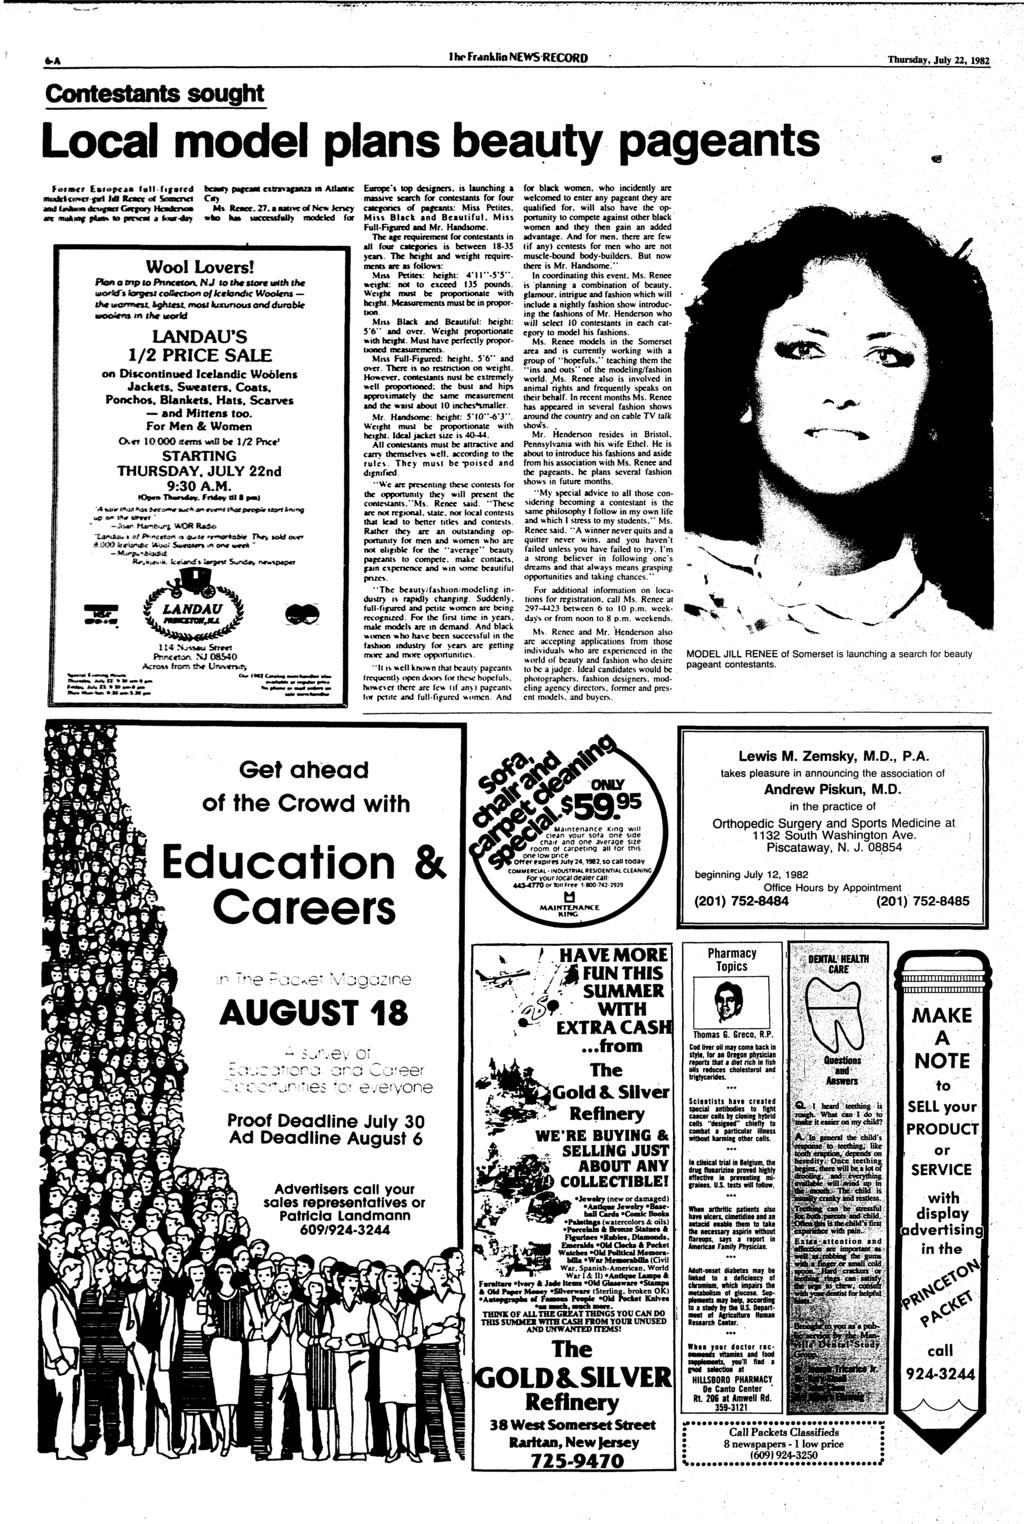 Contestants sought I IN* Franklin NEWS RECORD Thursday, July 22, 1982 Local model plans beauty pageants h»t*>p**m fall fifntcd J«S fumoc «* Seeaortei nwfcibf p&m* M pntiem a <*wr»drj beaut?